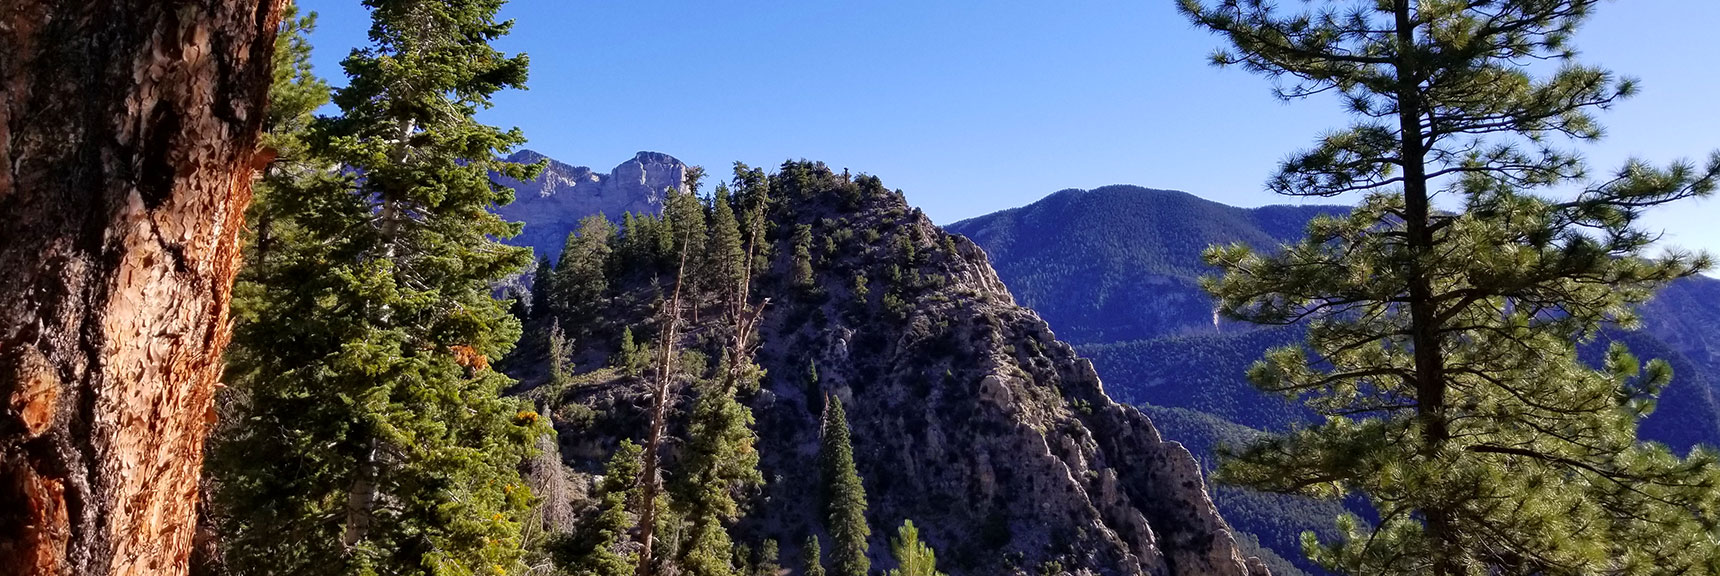 Cathedral Rock Viewed from Its Saddle, Mt. Charleston Wilderness, Nevada